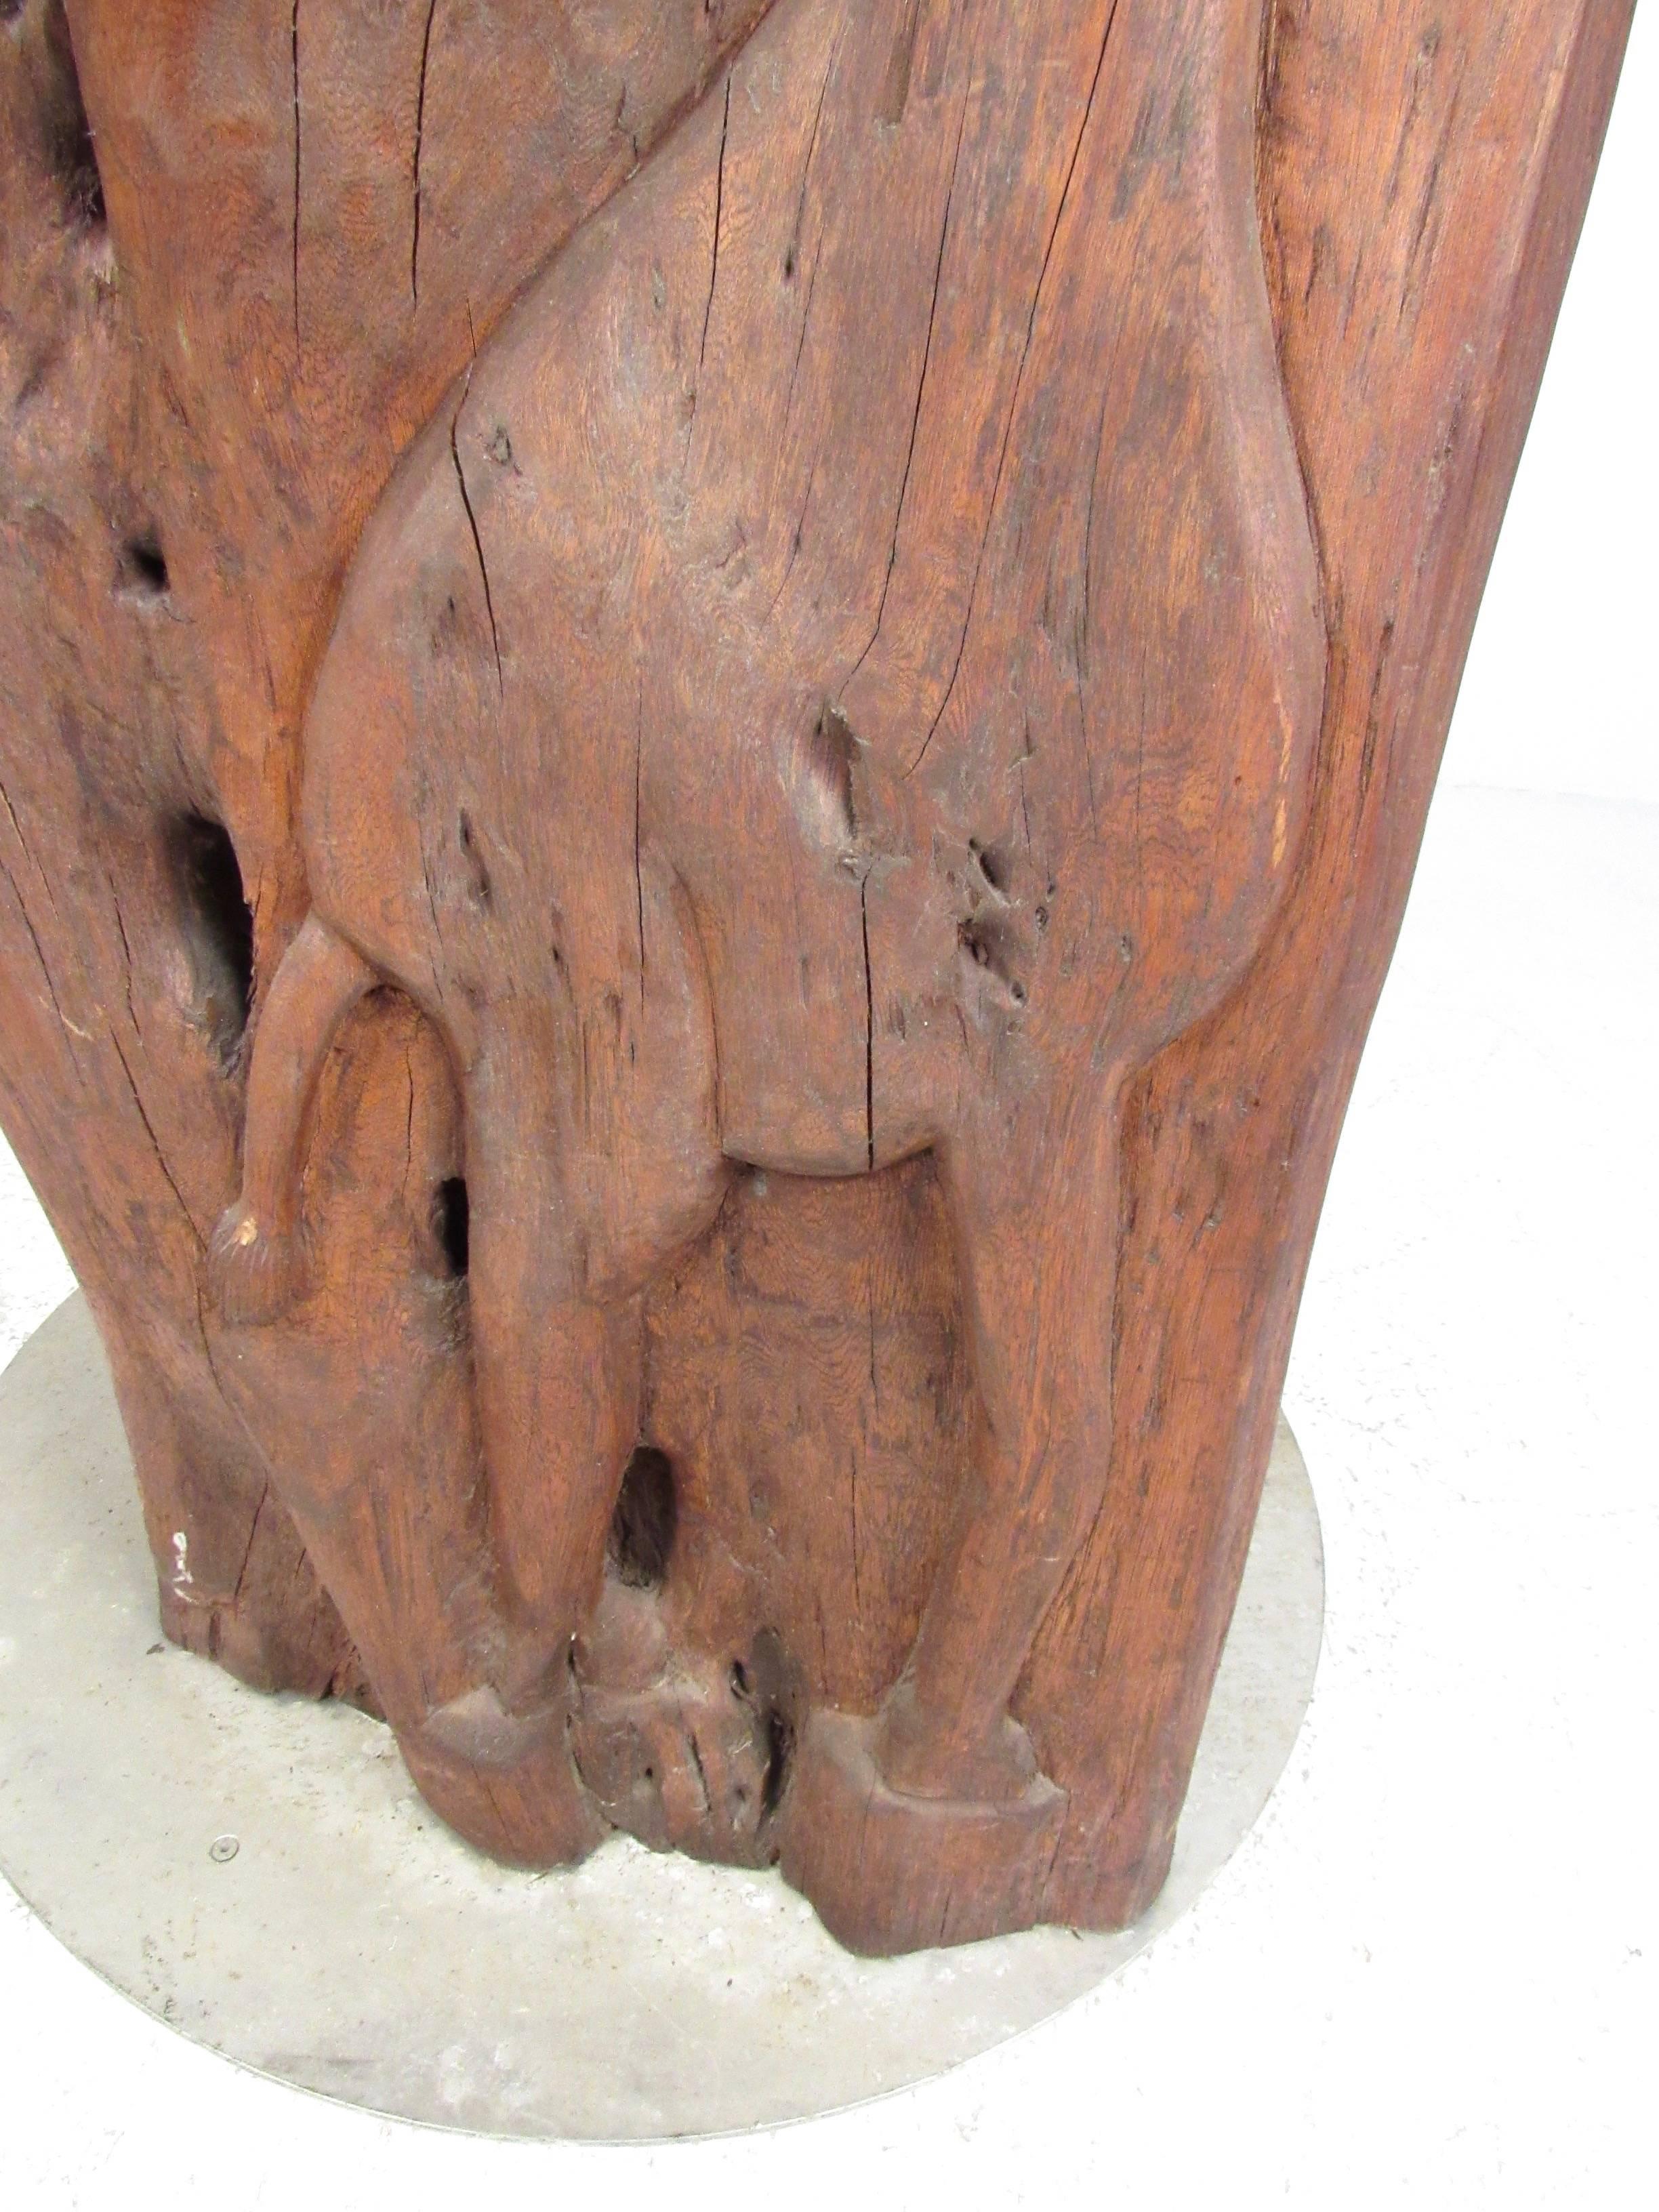 Wood Impressive Sculpted Live Edge Tree Trunk African Tribal Art For Sale